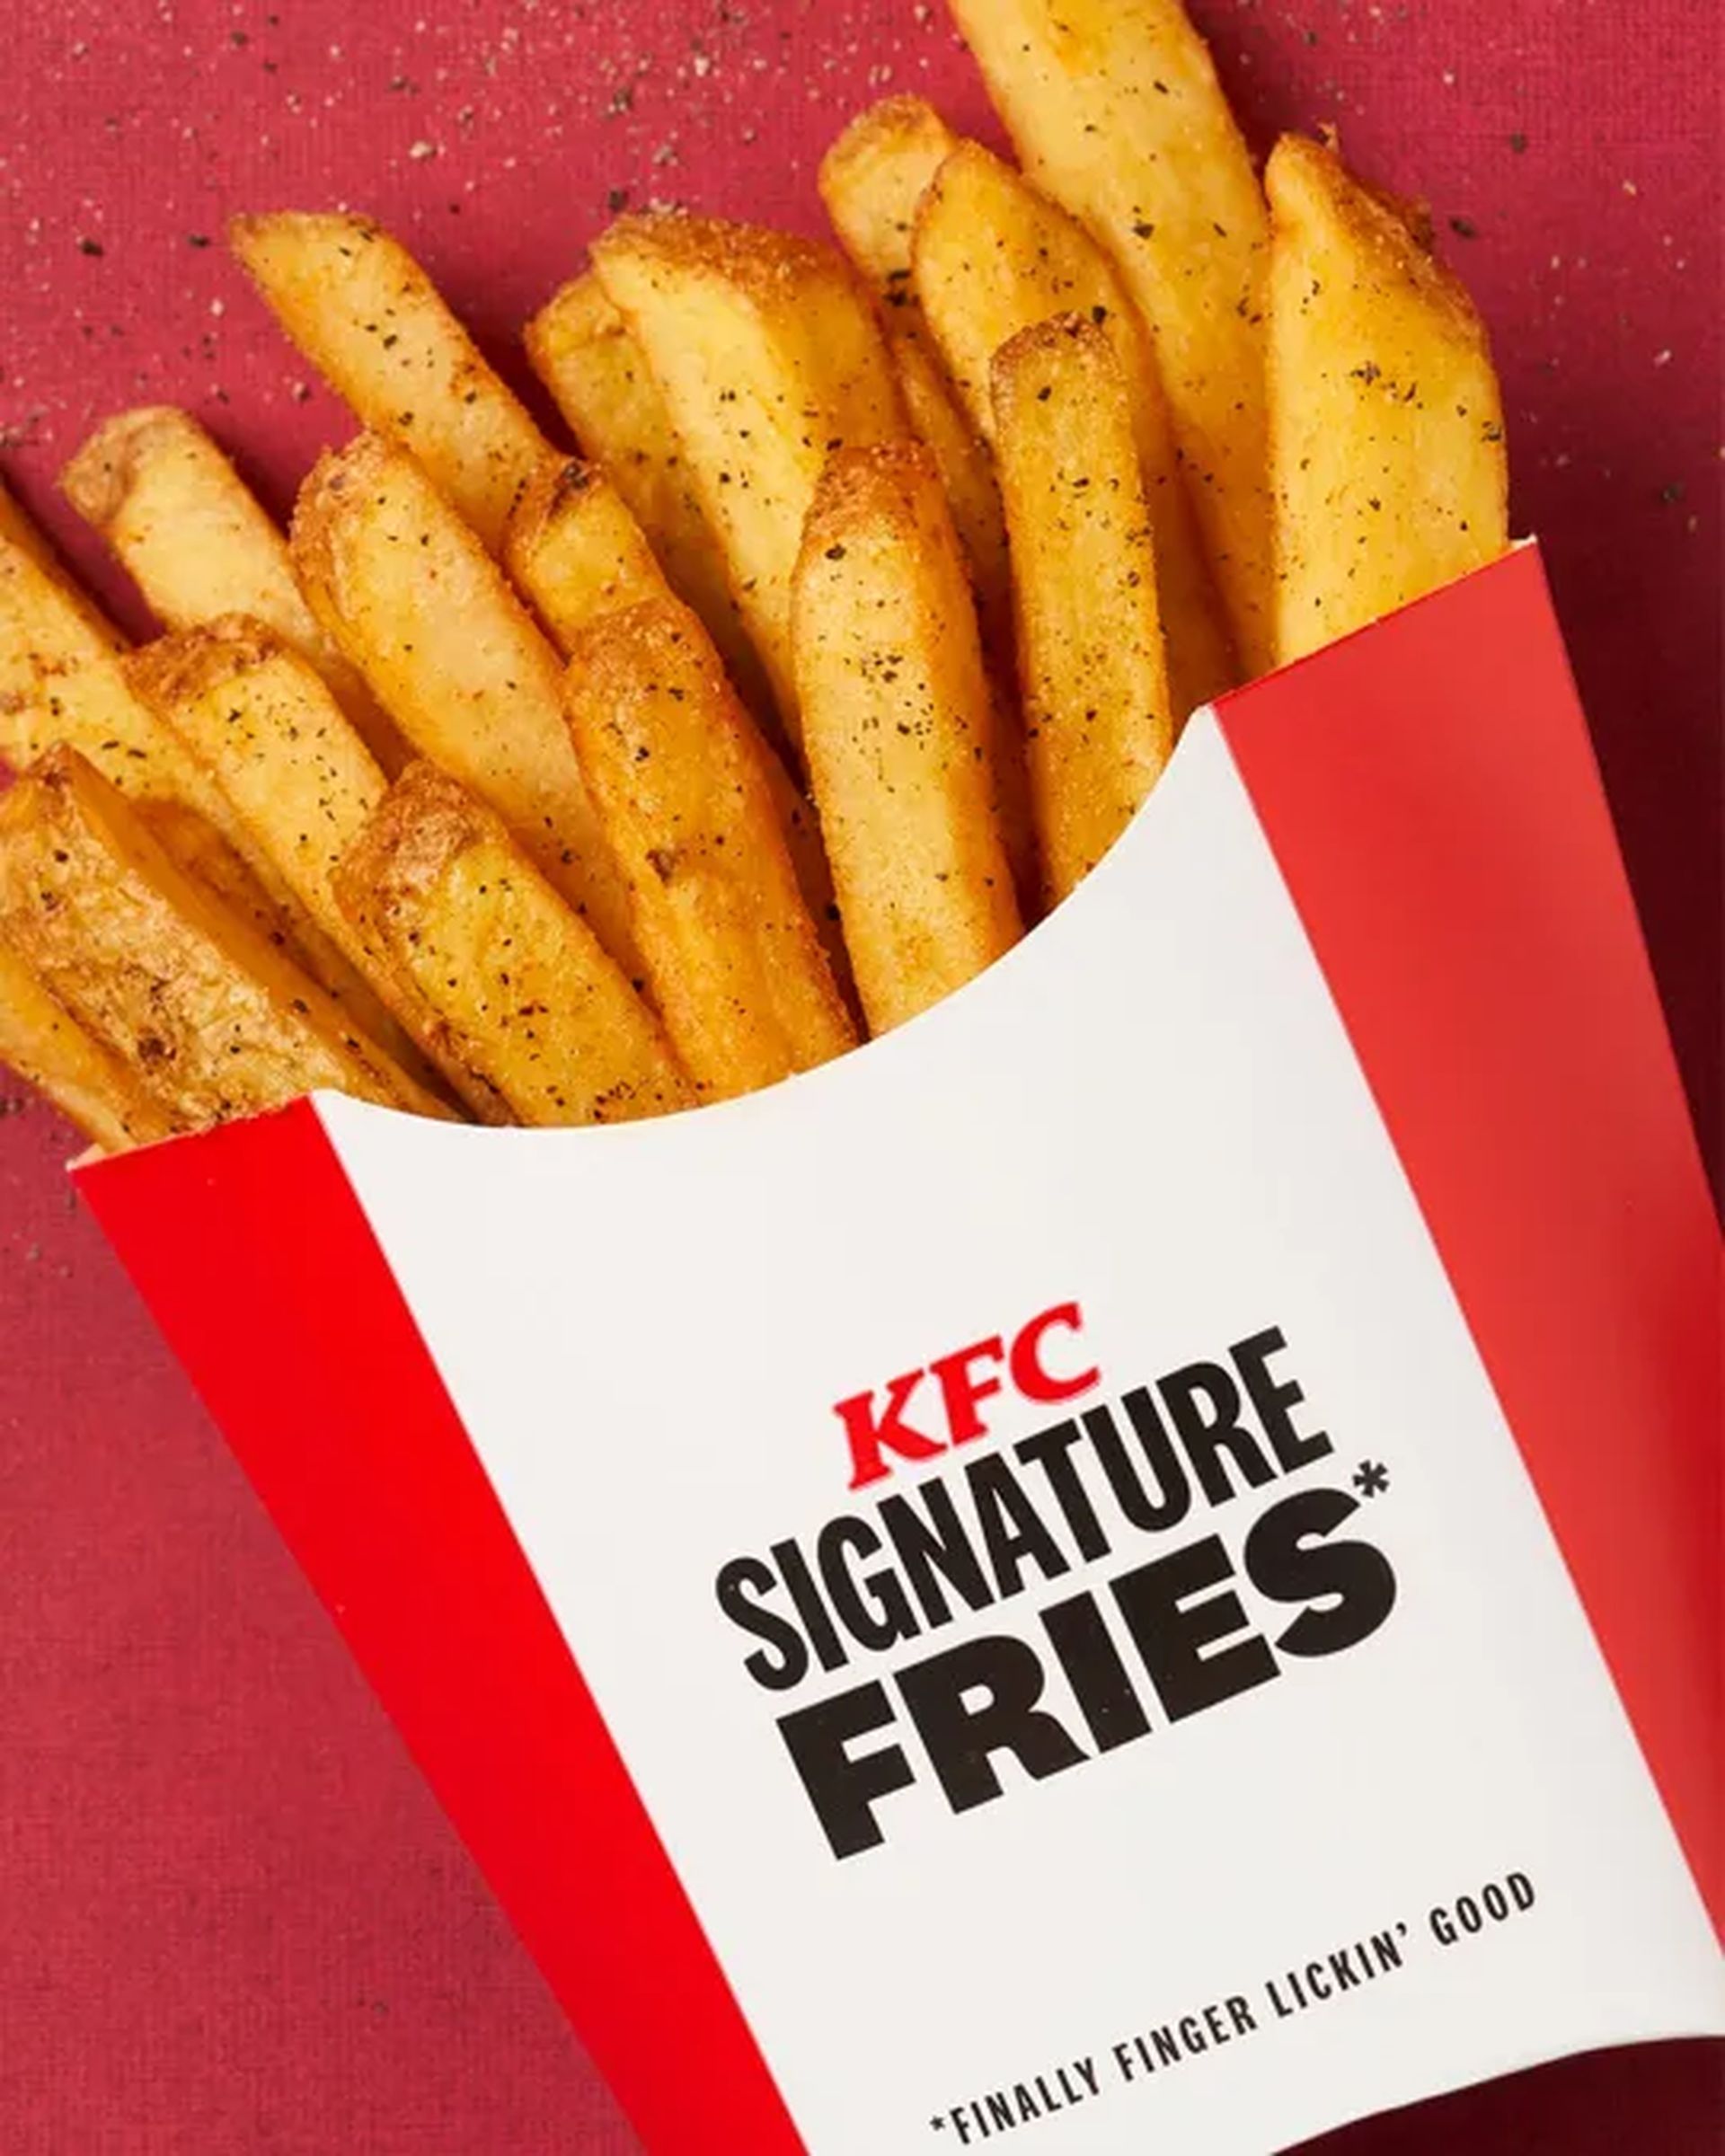 Uncover the sizzling debate surrounding KFC's "Signature fries" and whether they'll finally resolve the notorious KFC fries issue.